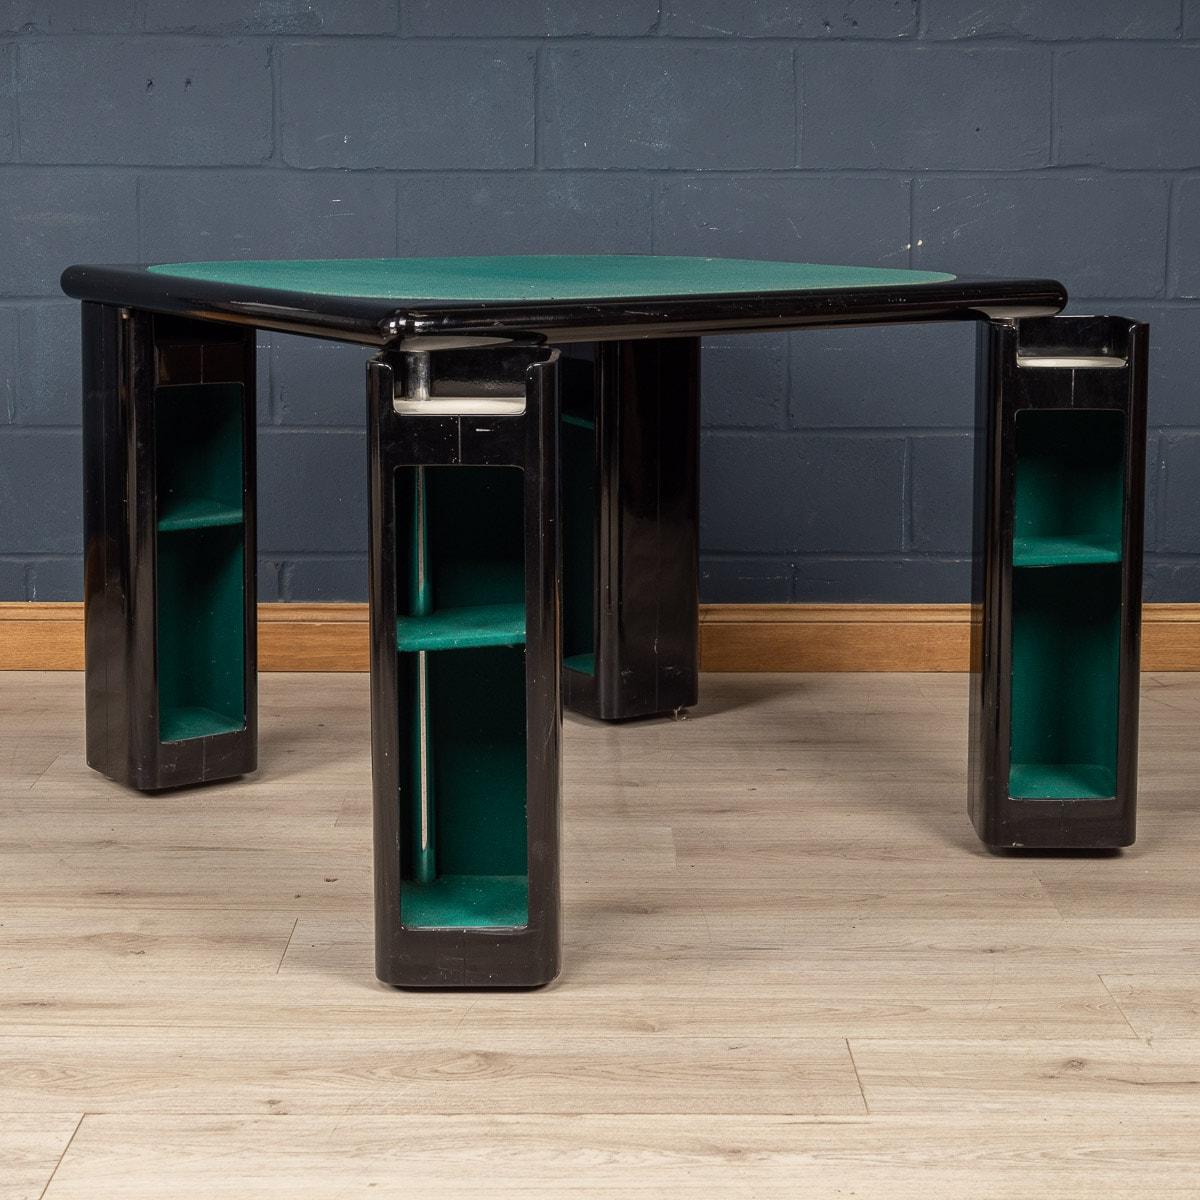 Pine Lacquered Wood Games Table & Chairs by Pierluigi Molinari for Pozzi, Milan